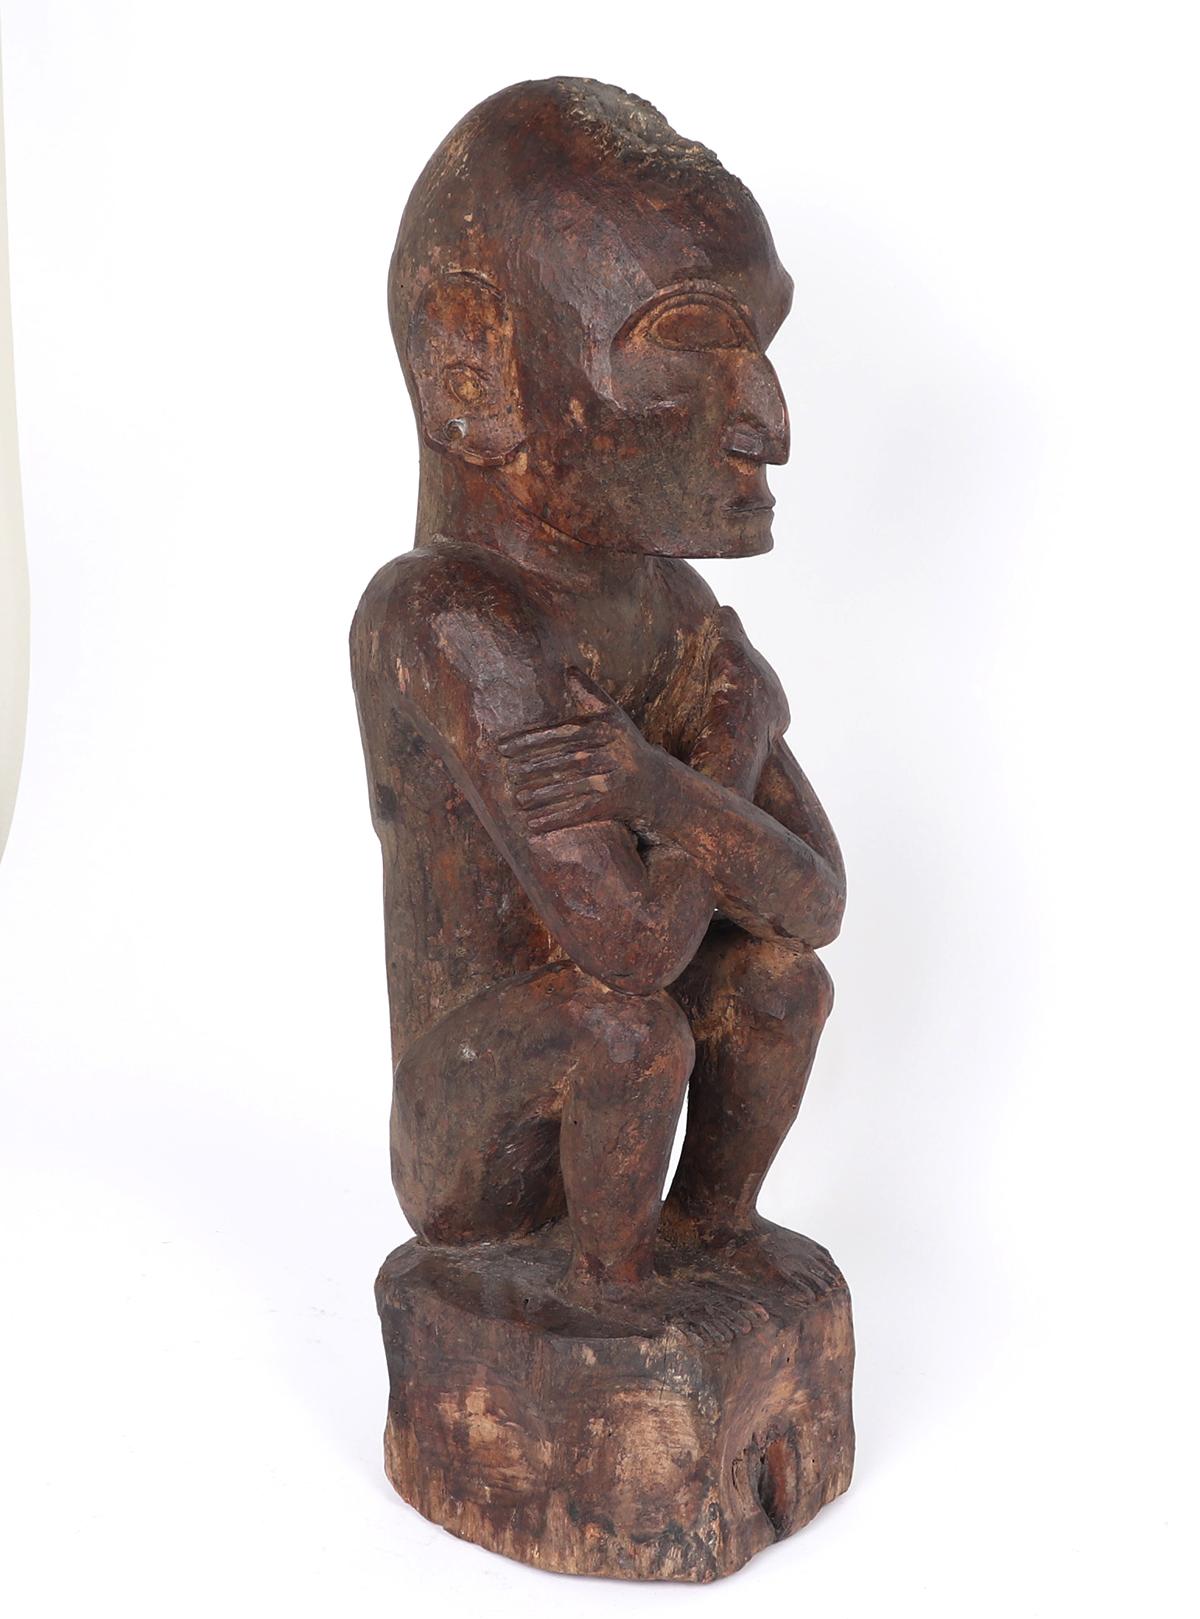 Philippines, Kankanay or Bontoc-carved Wooden House God Figure